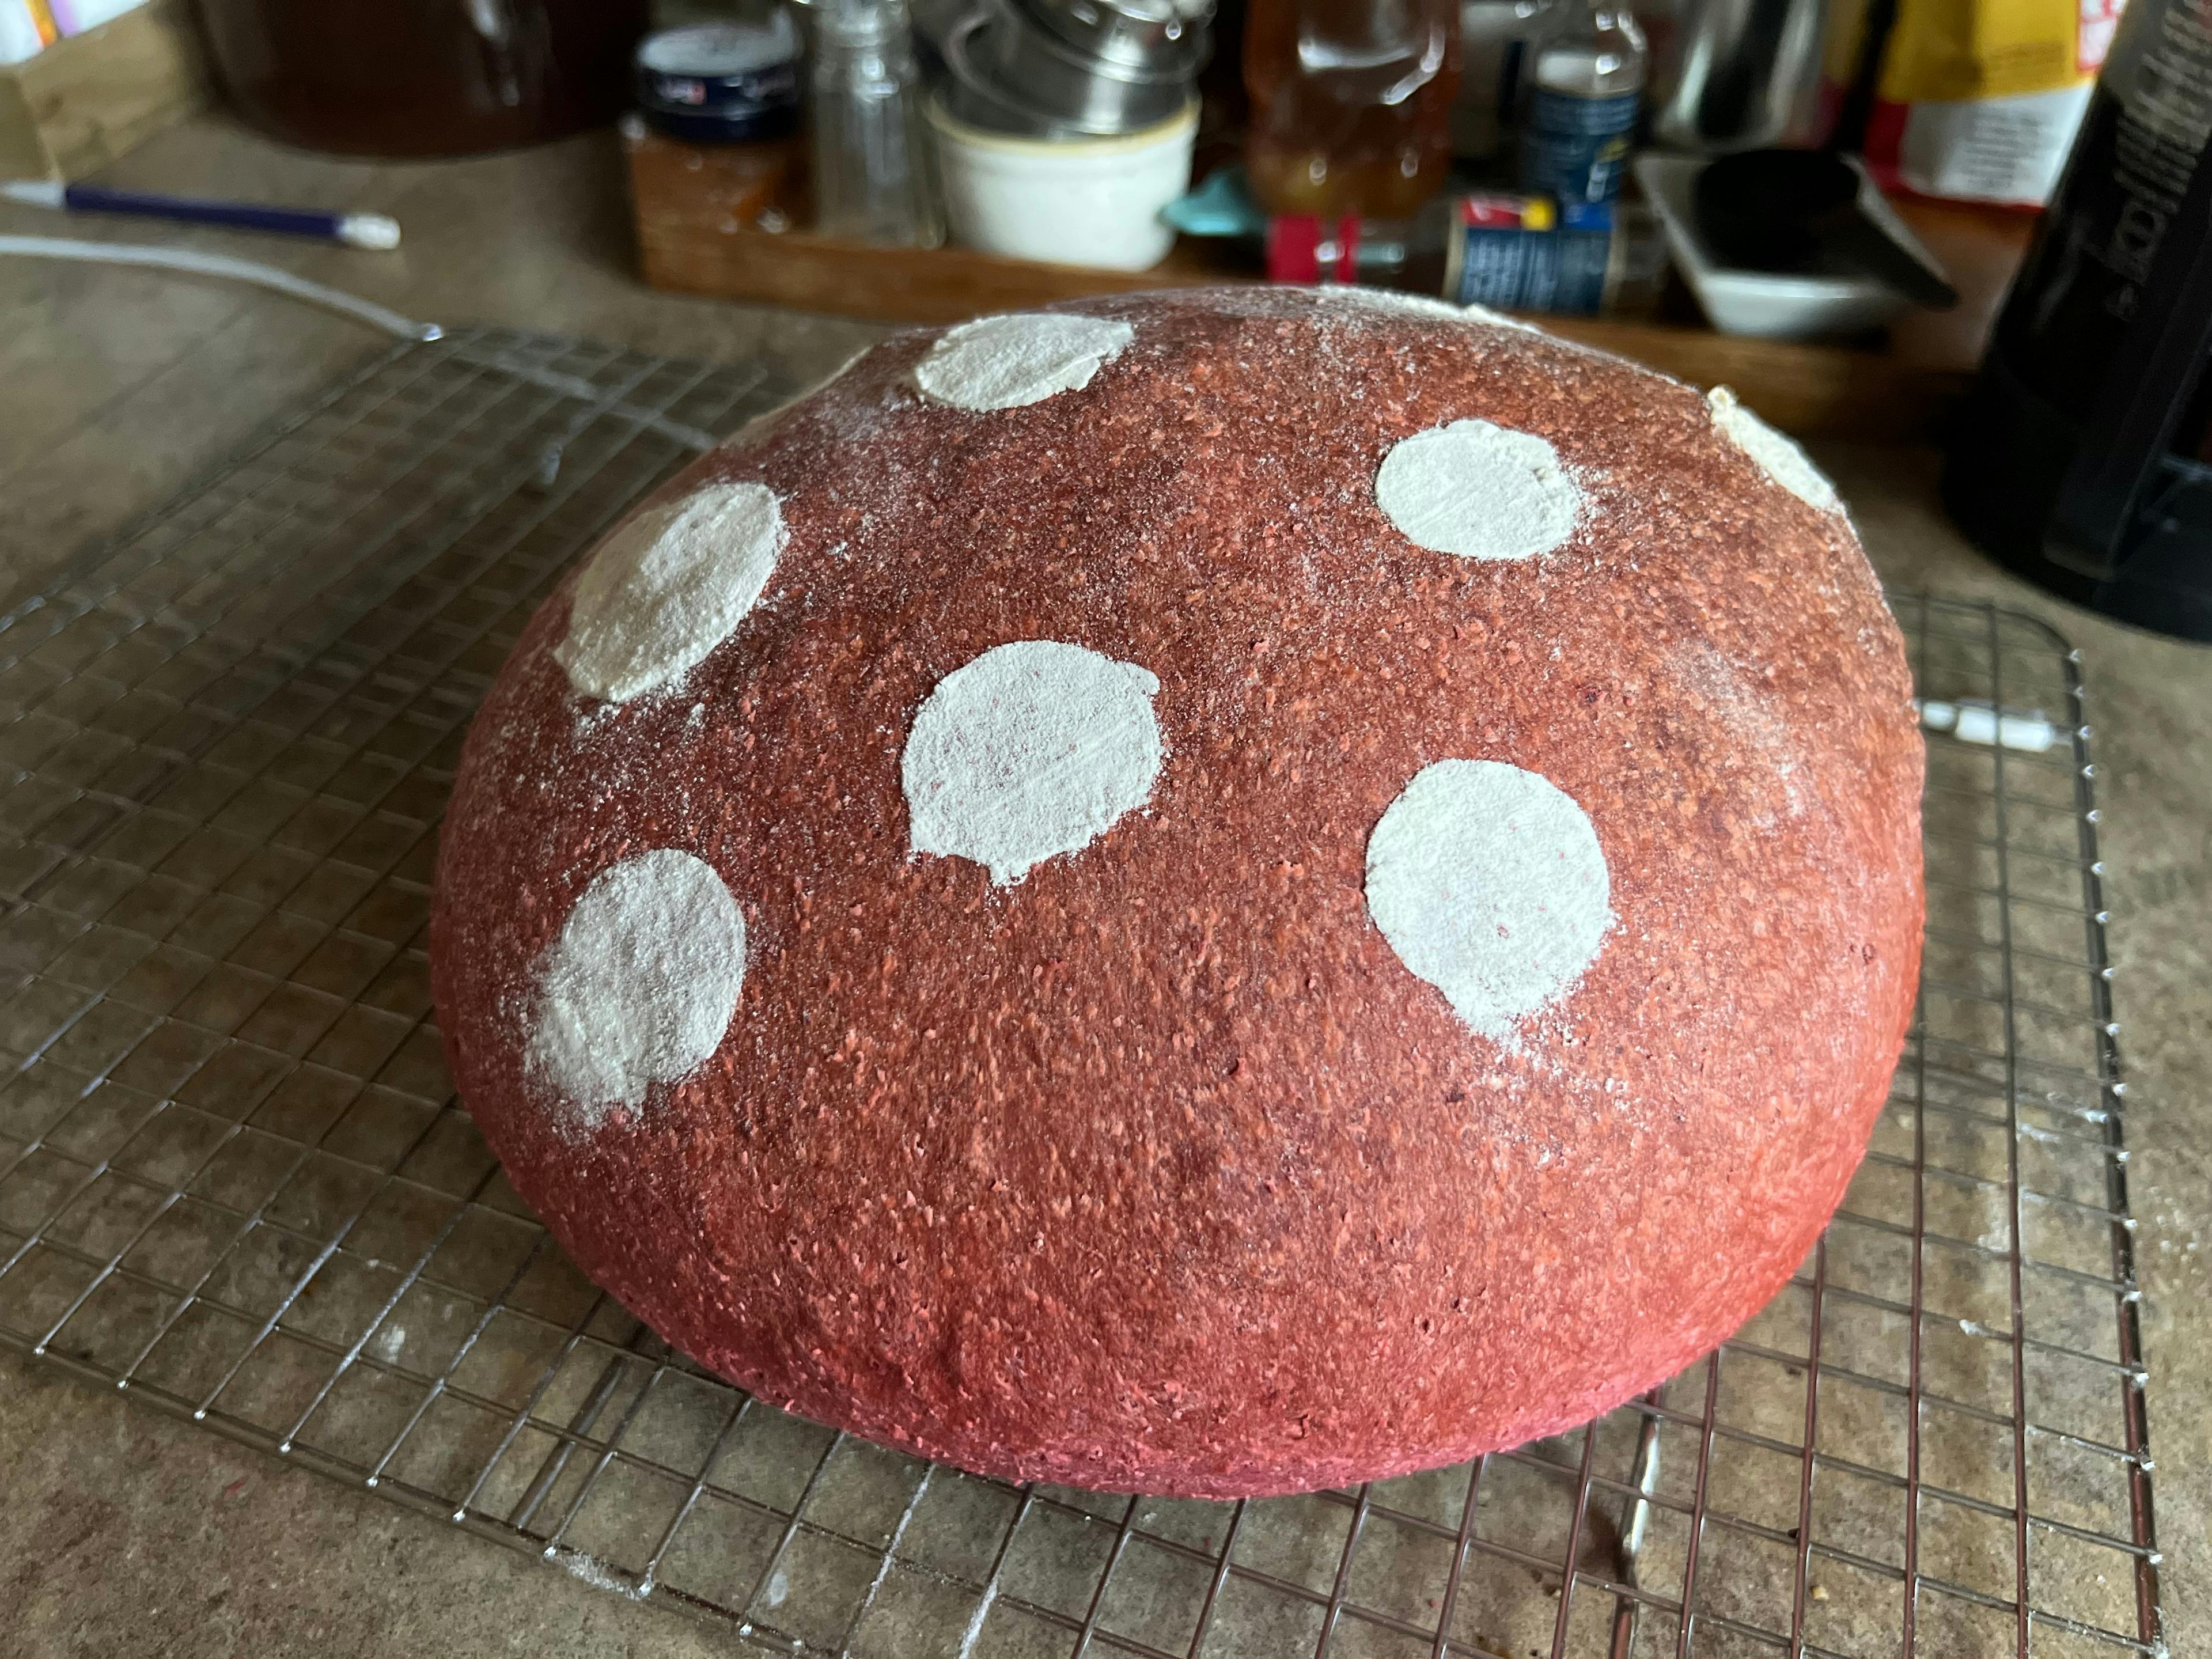 Beet bread cooling with white circles of flour on the crust